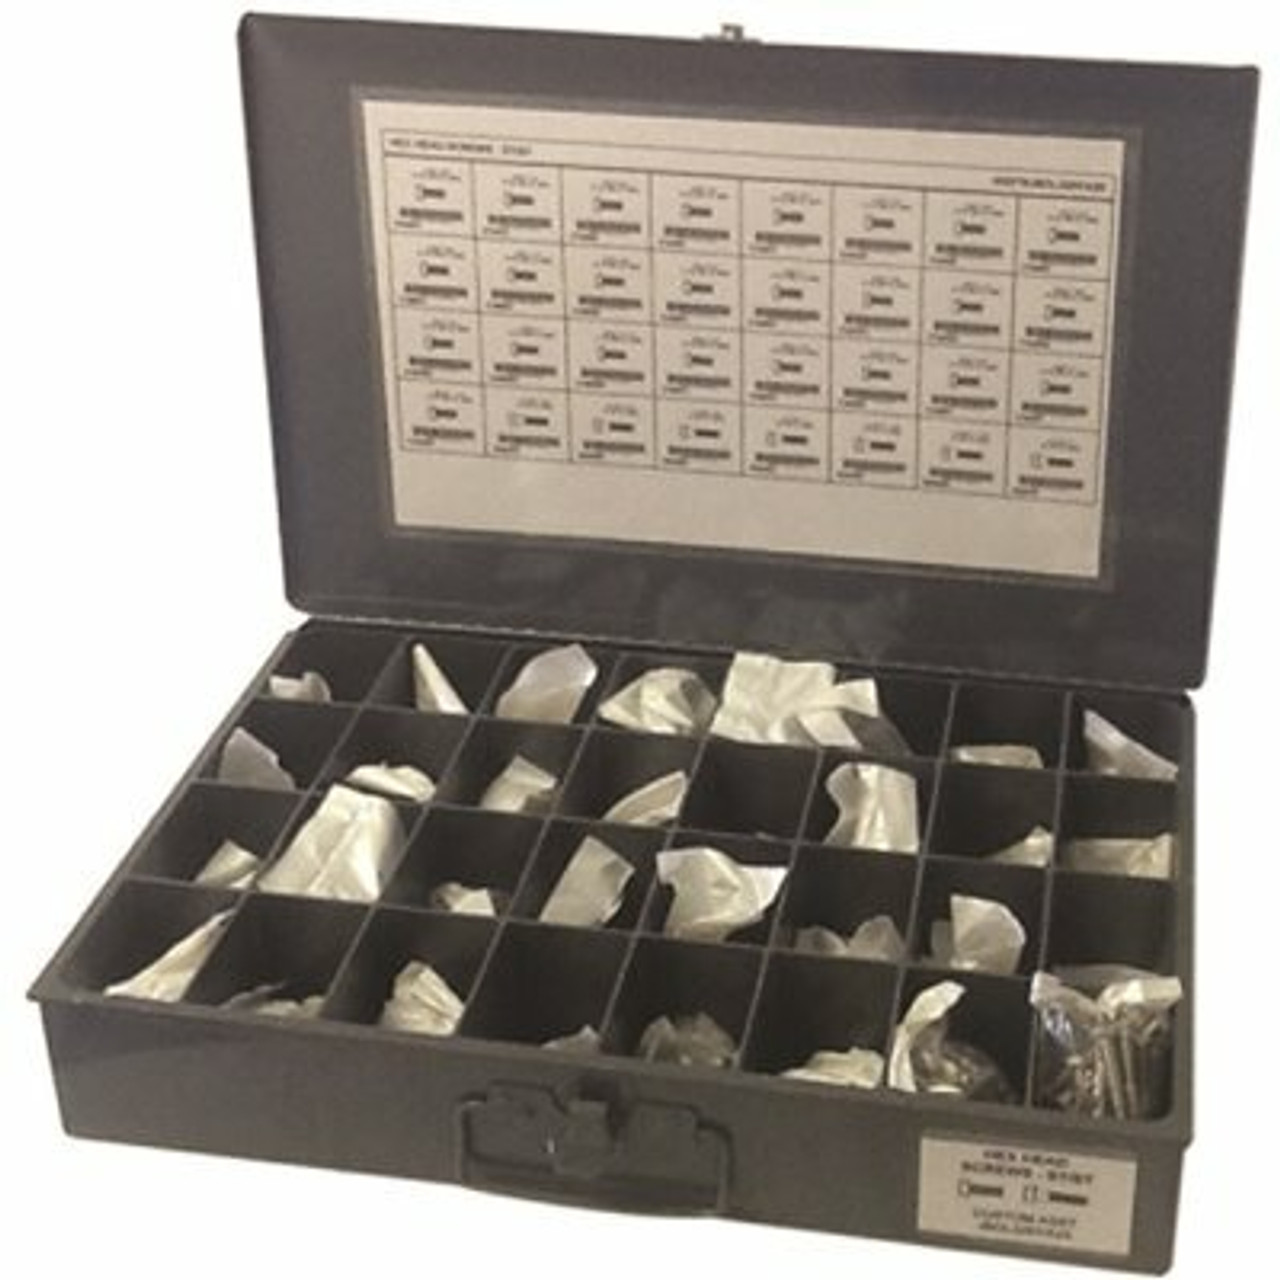 Unslotted External Hex Head 18-8 Stainless Steel Machine Screw Kit Assortment In Metal Tray (800-Pieces)